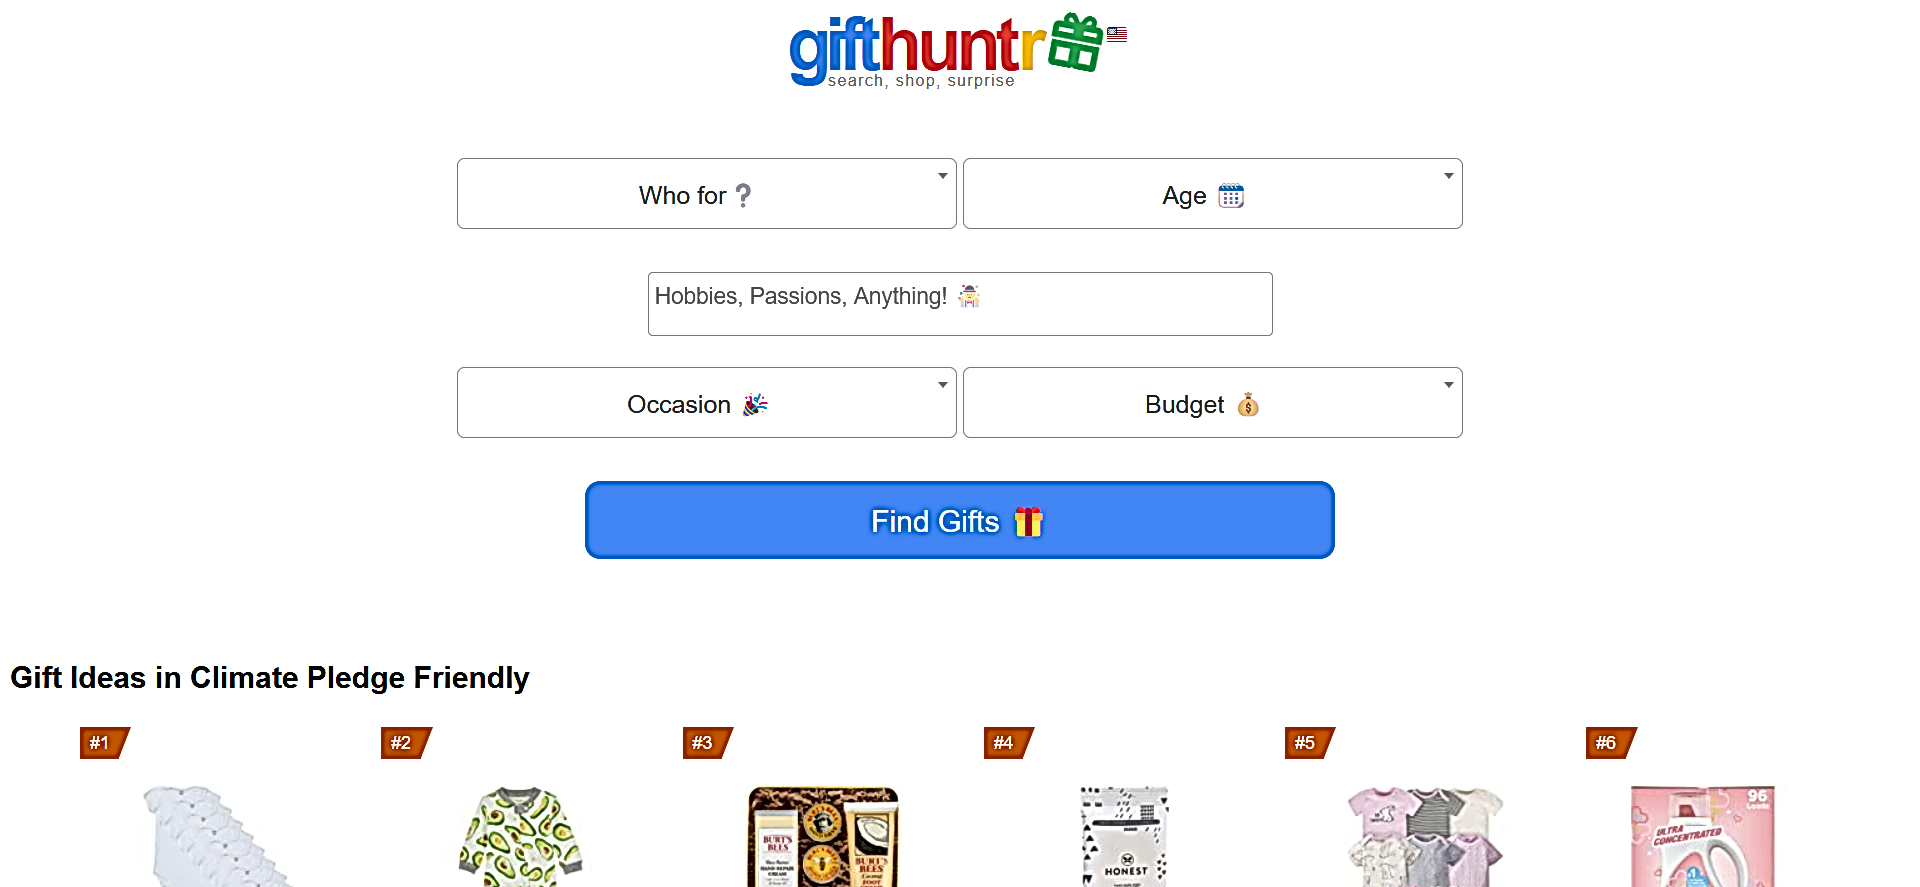 GiftHuntr featured